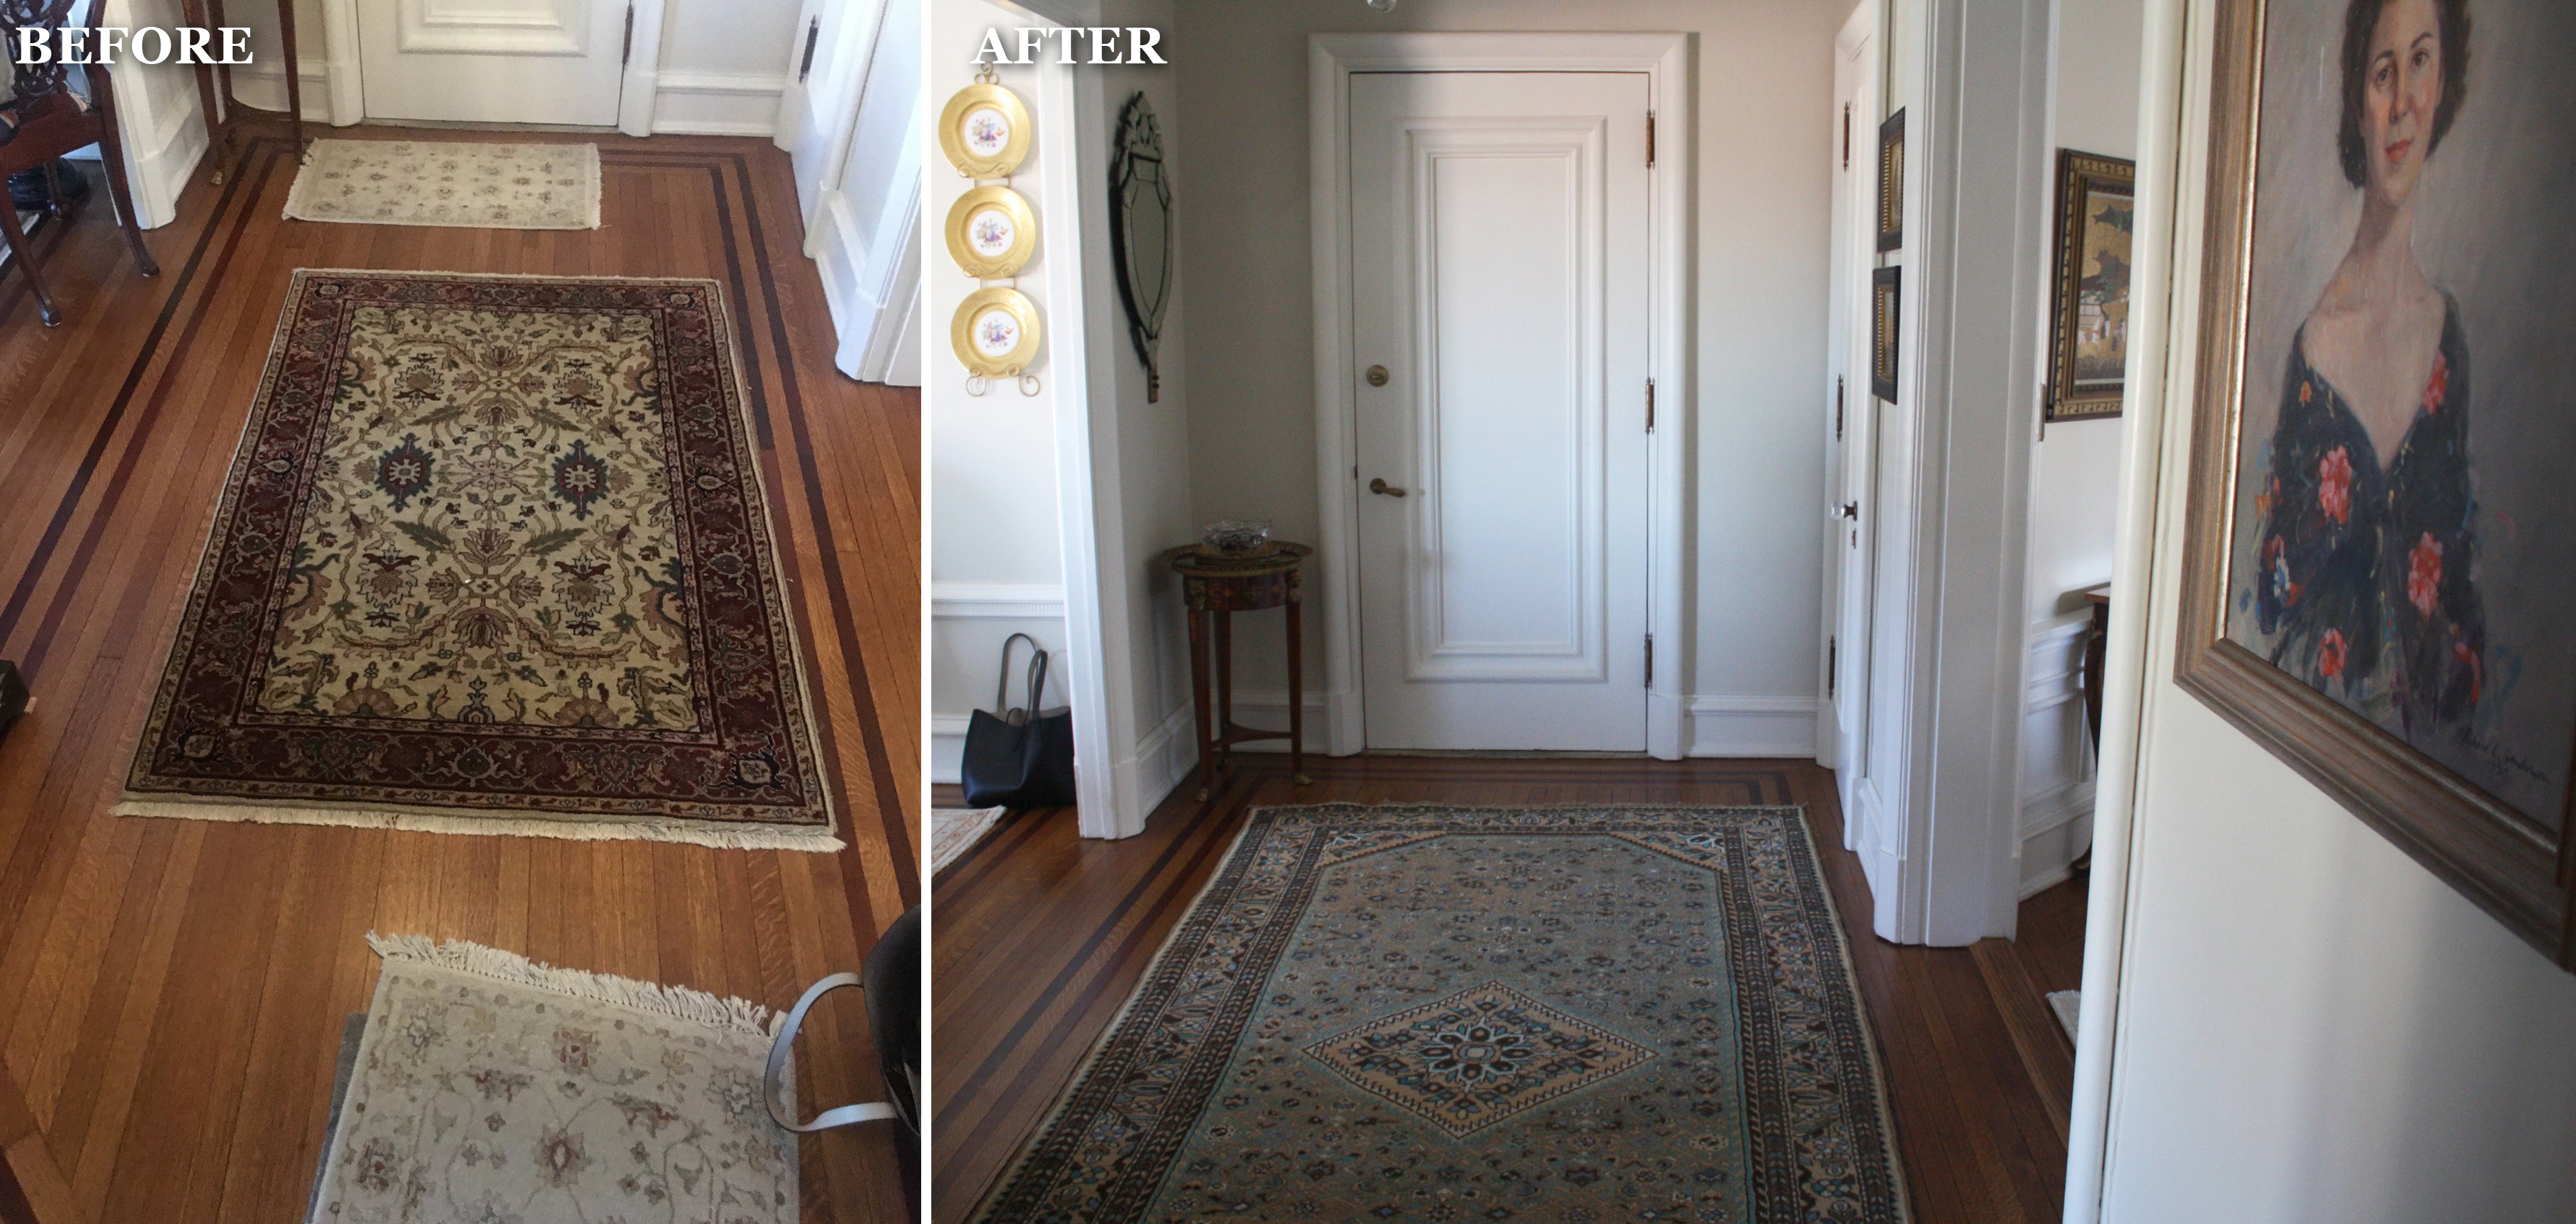 Hall runner before and after